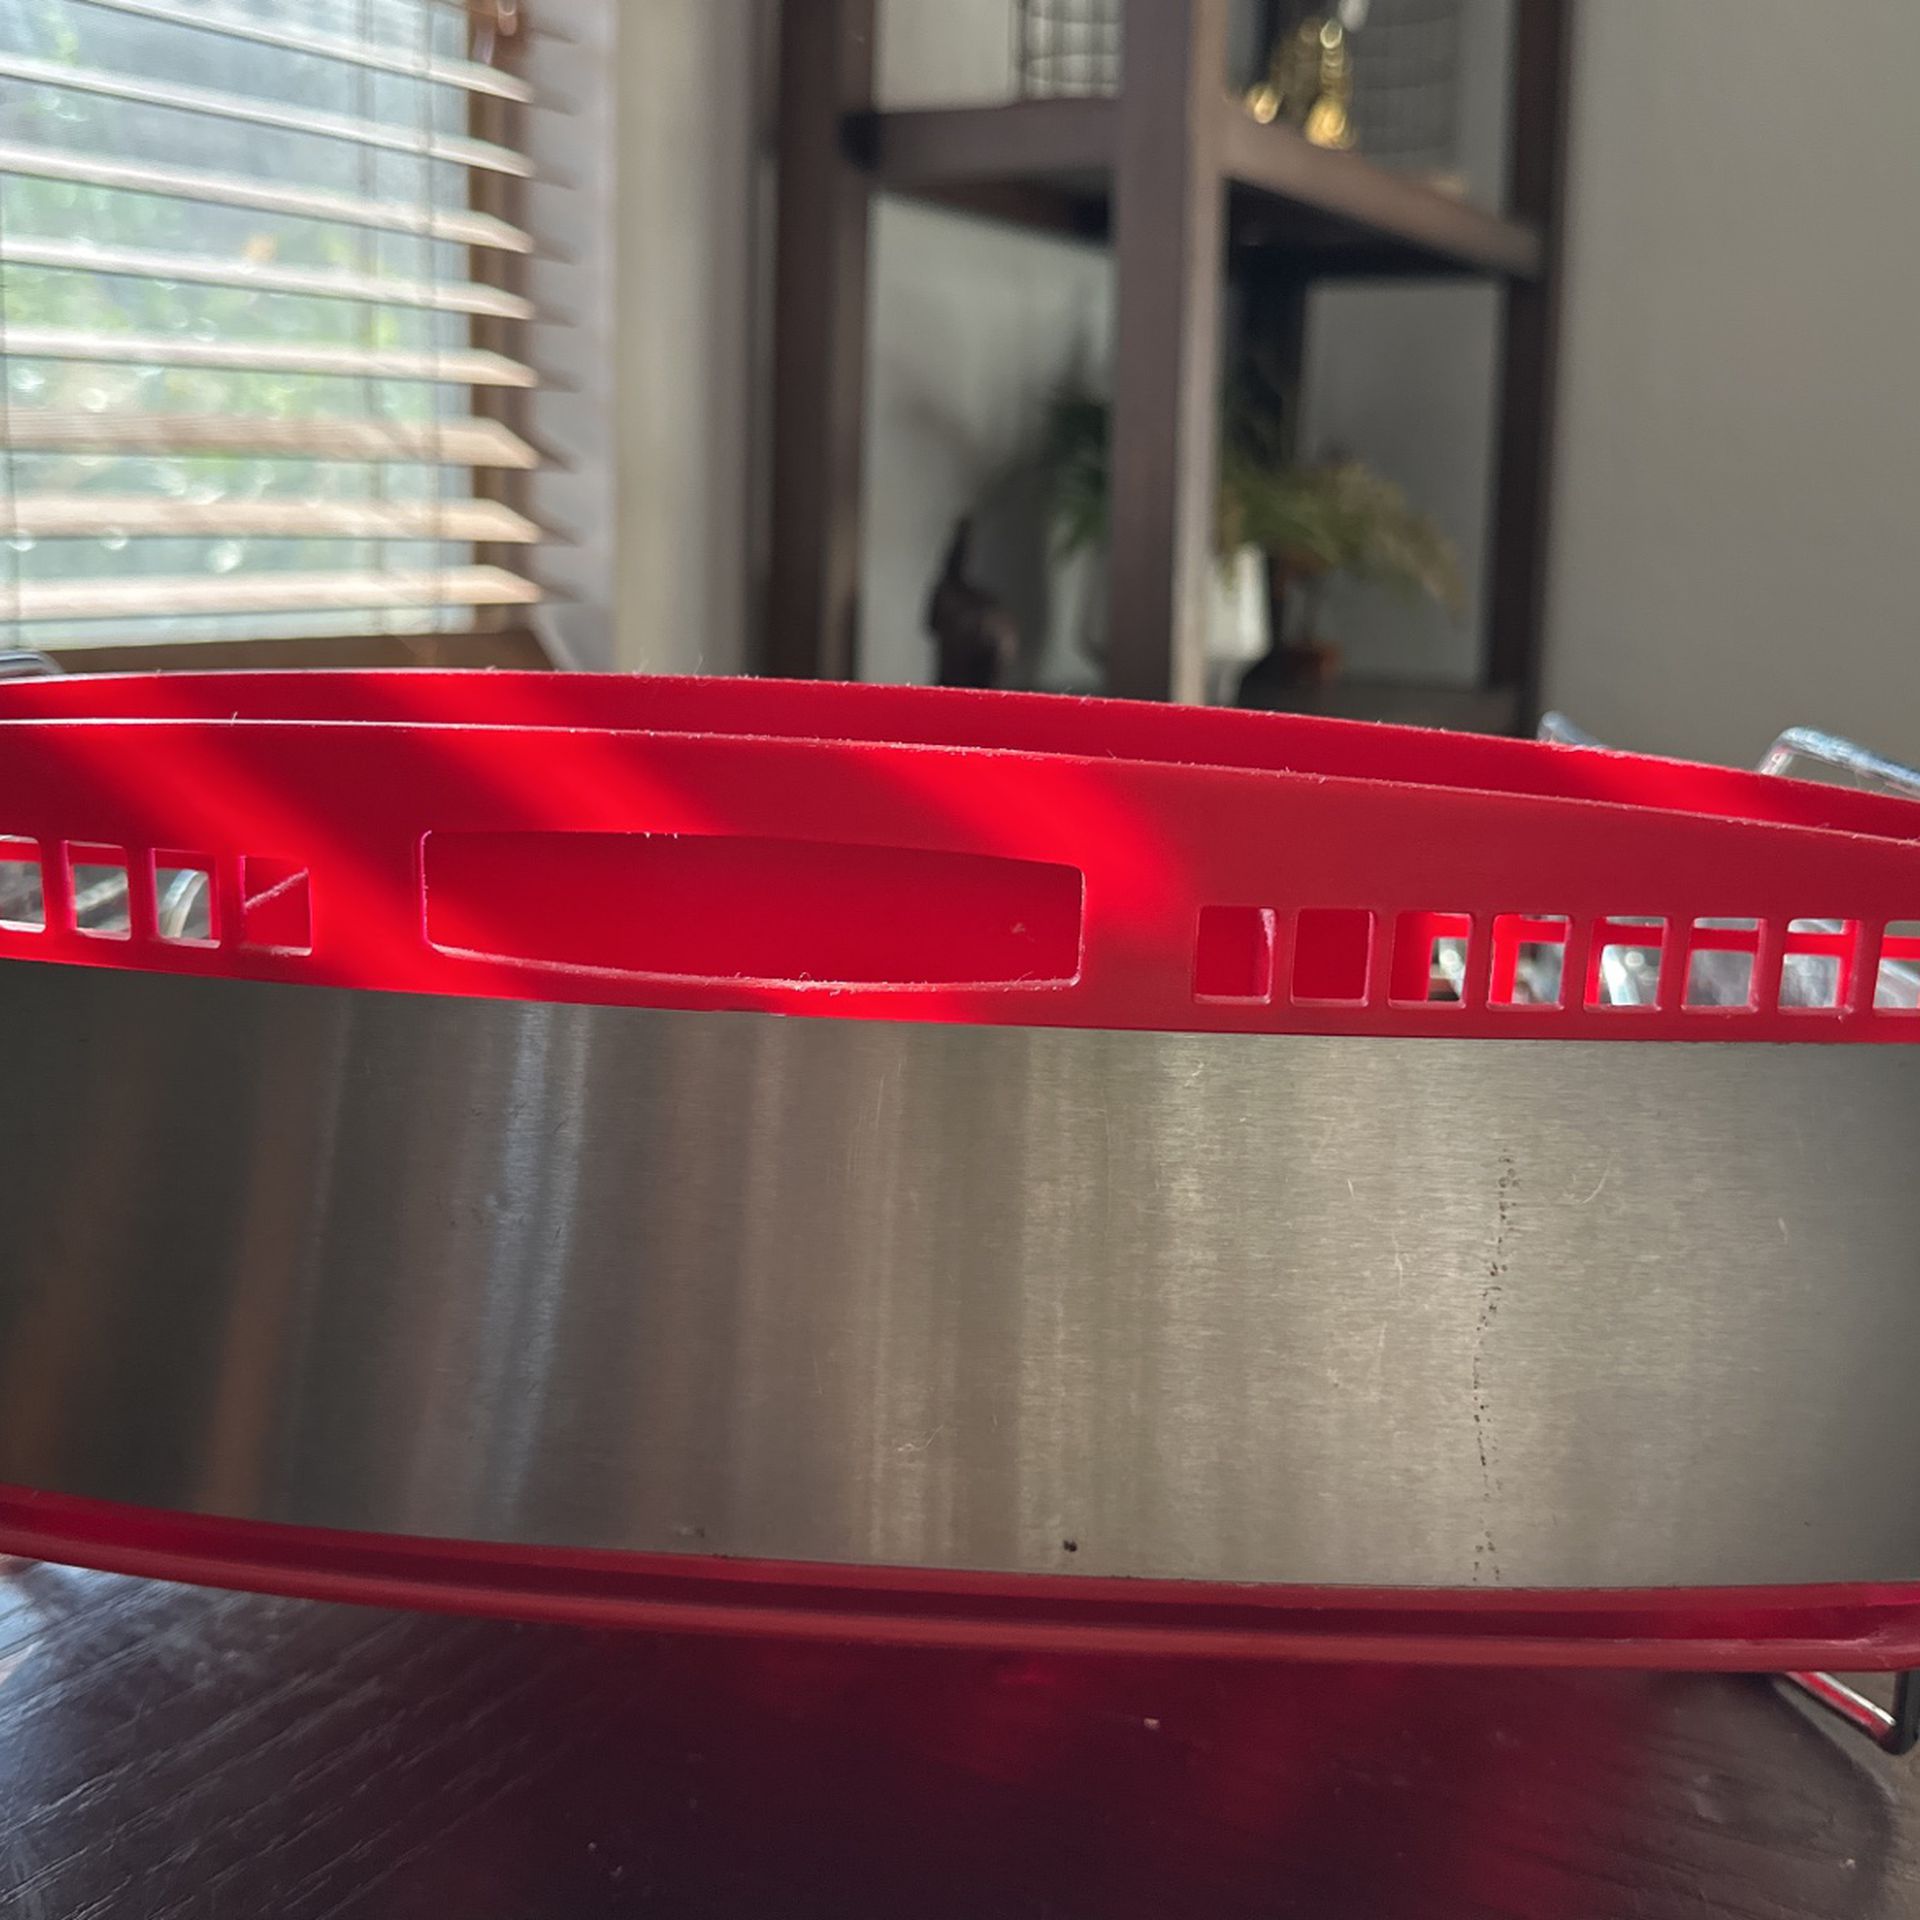 NEW in Box: KitchenAid Dish-drying Rack for Sale in Scottsdale, AZ - OfferUp